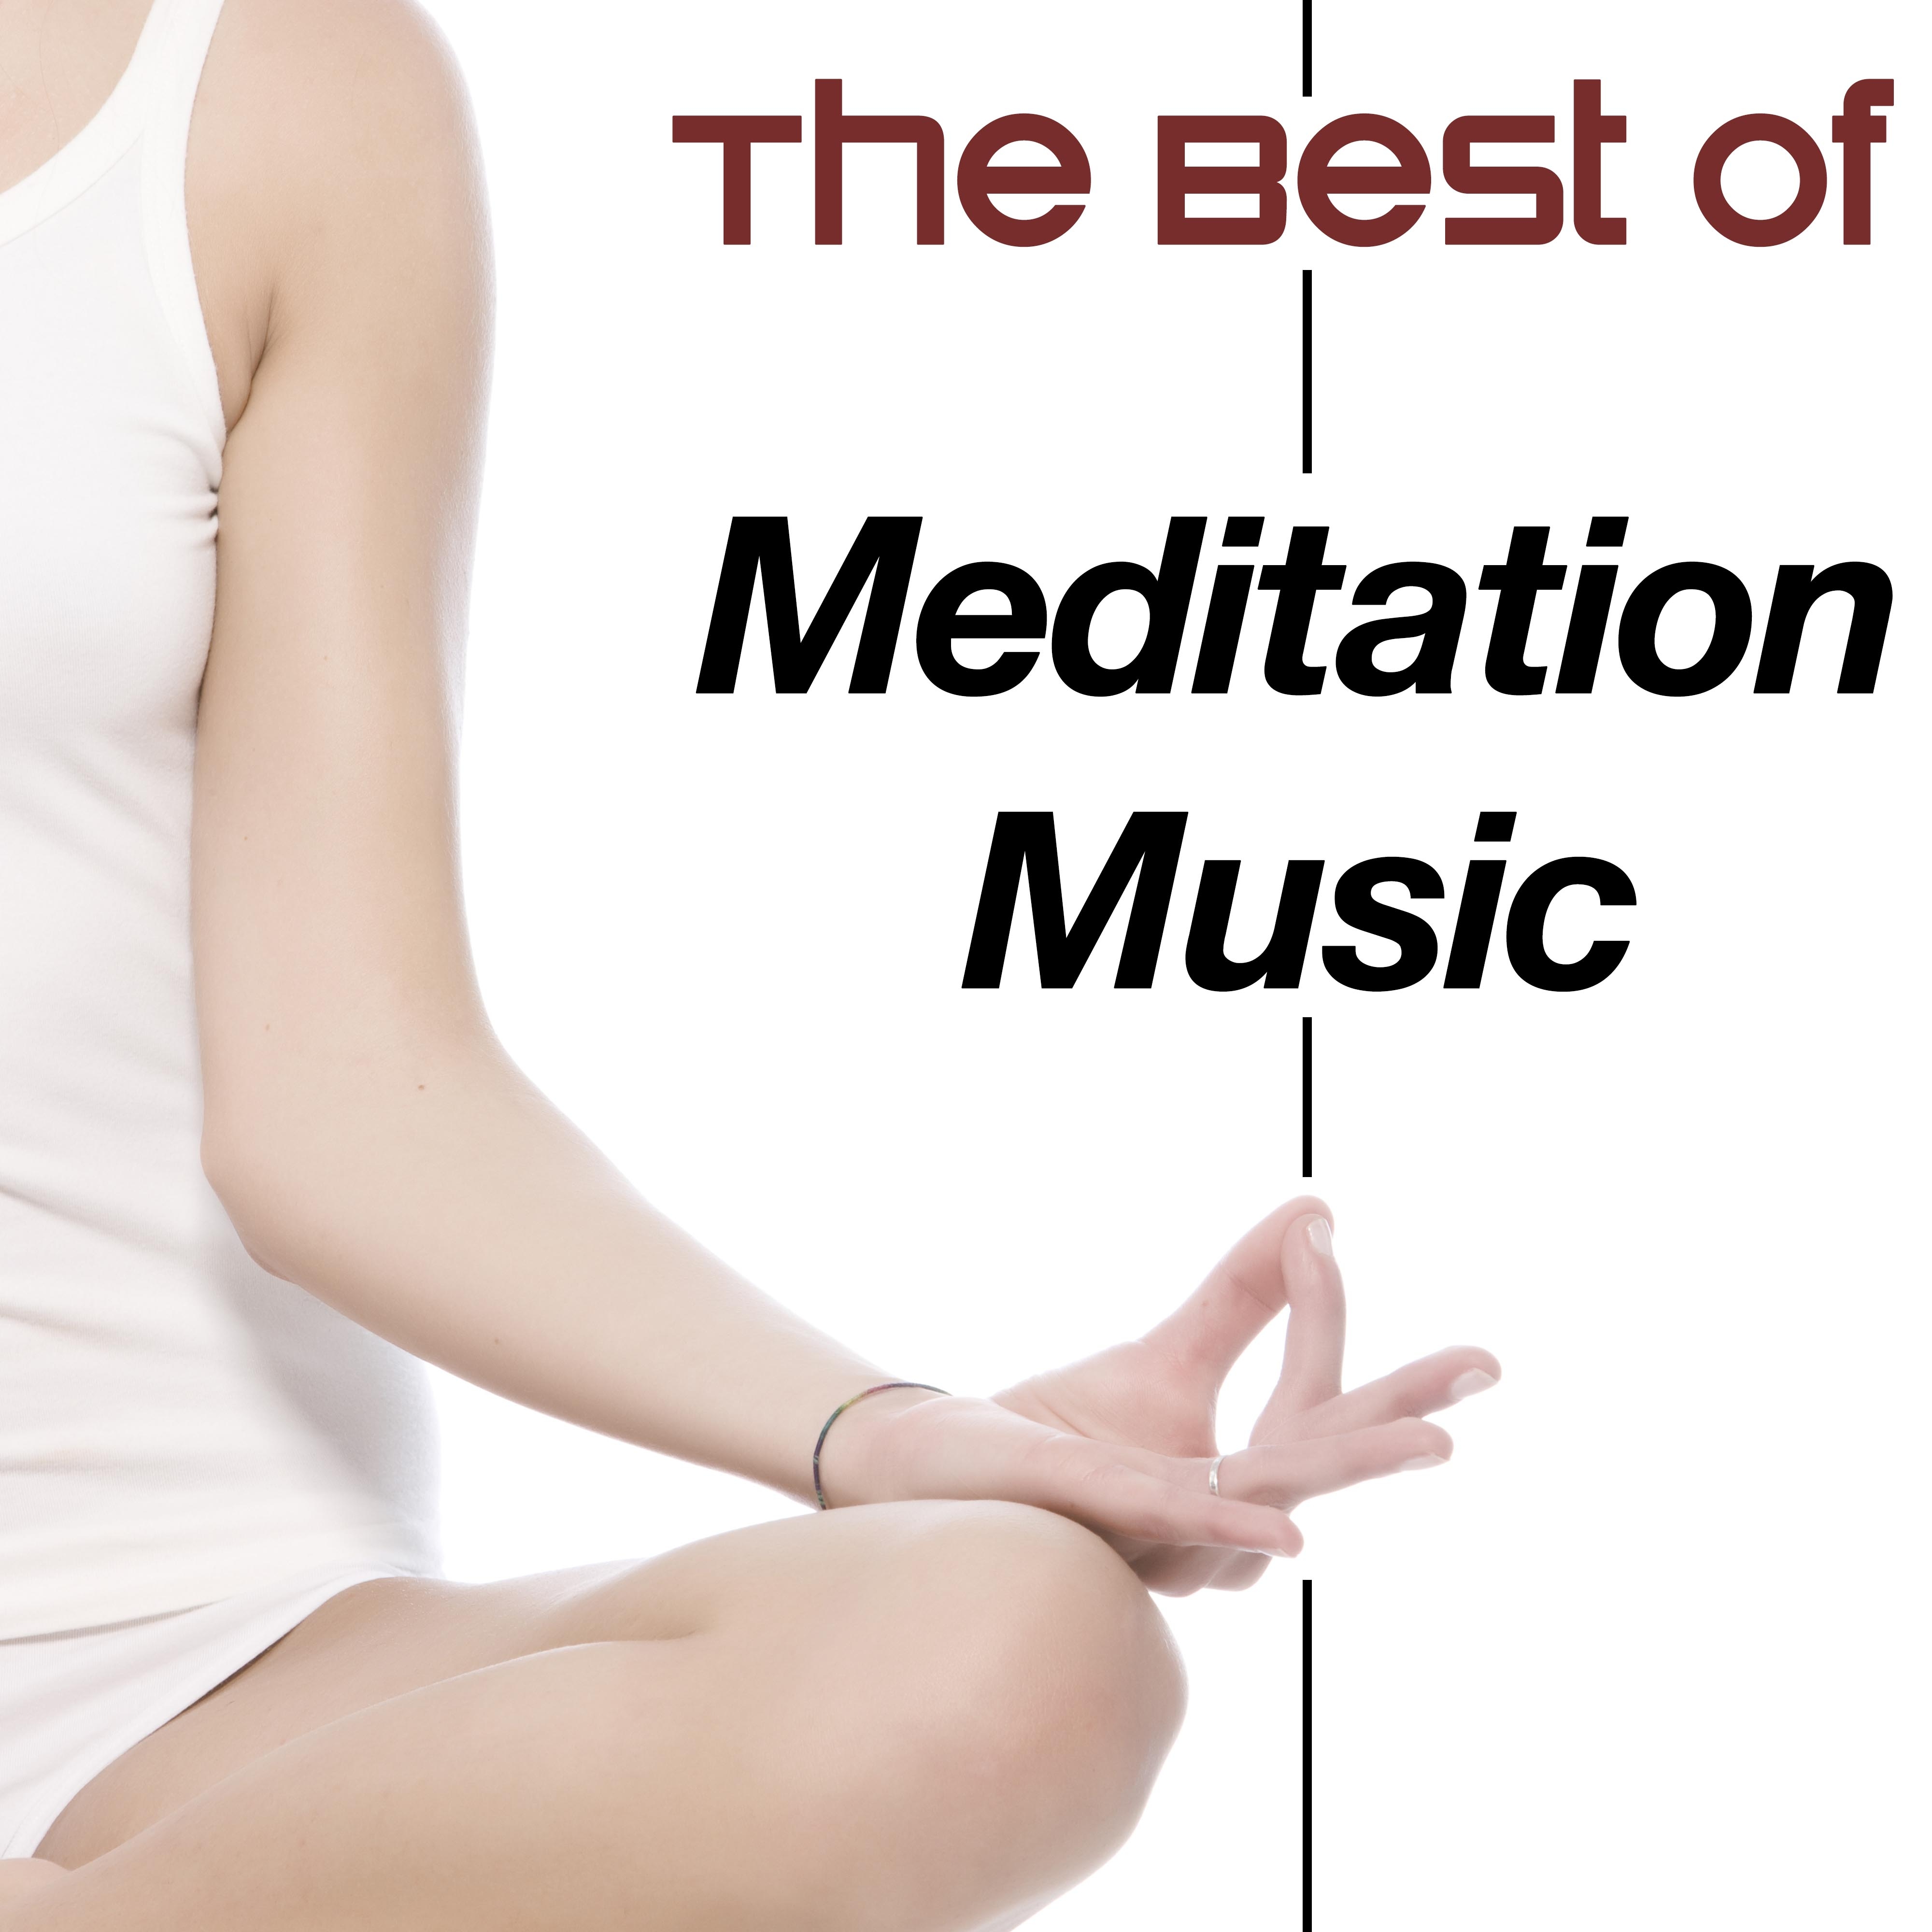 The Best of Meditation Music: Buddhist inspired New Age Songs for Deep Relaxation, Reiki, Massage to achieve Inner Peace and Quiet